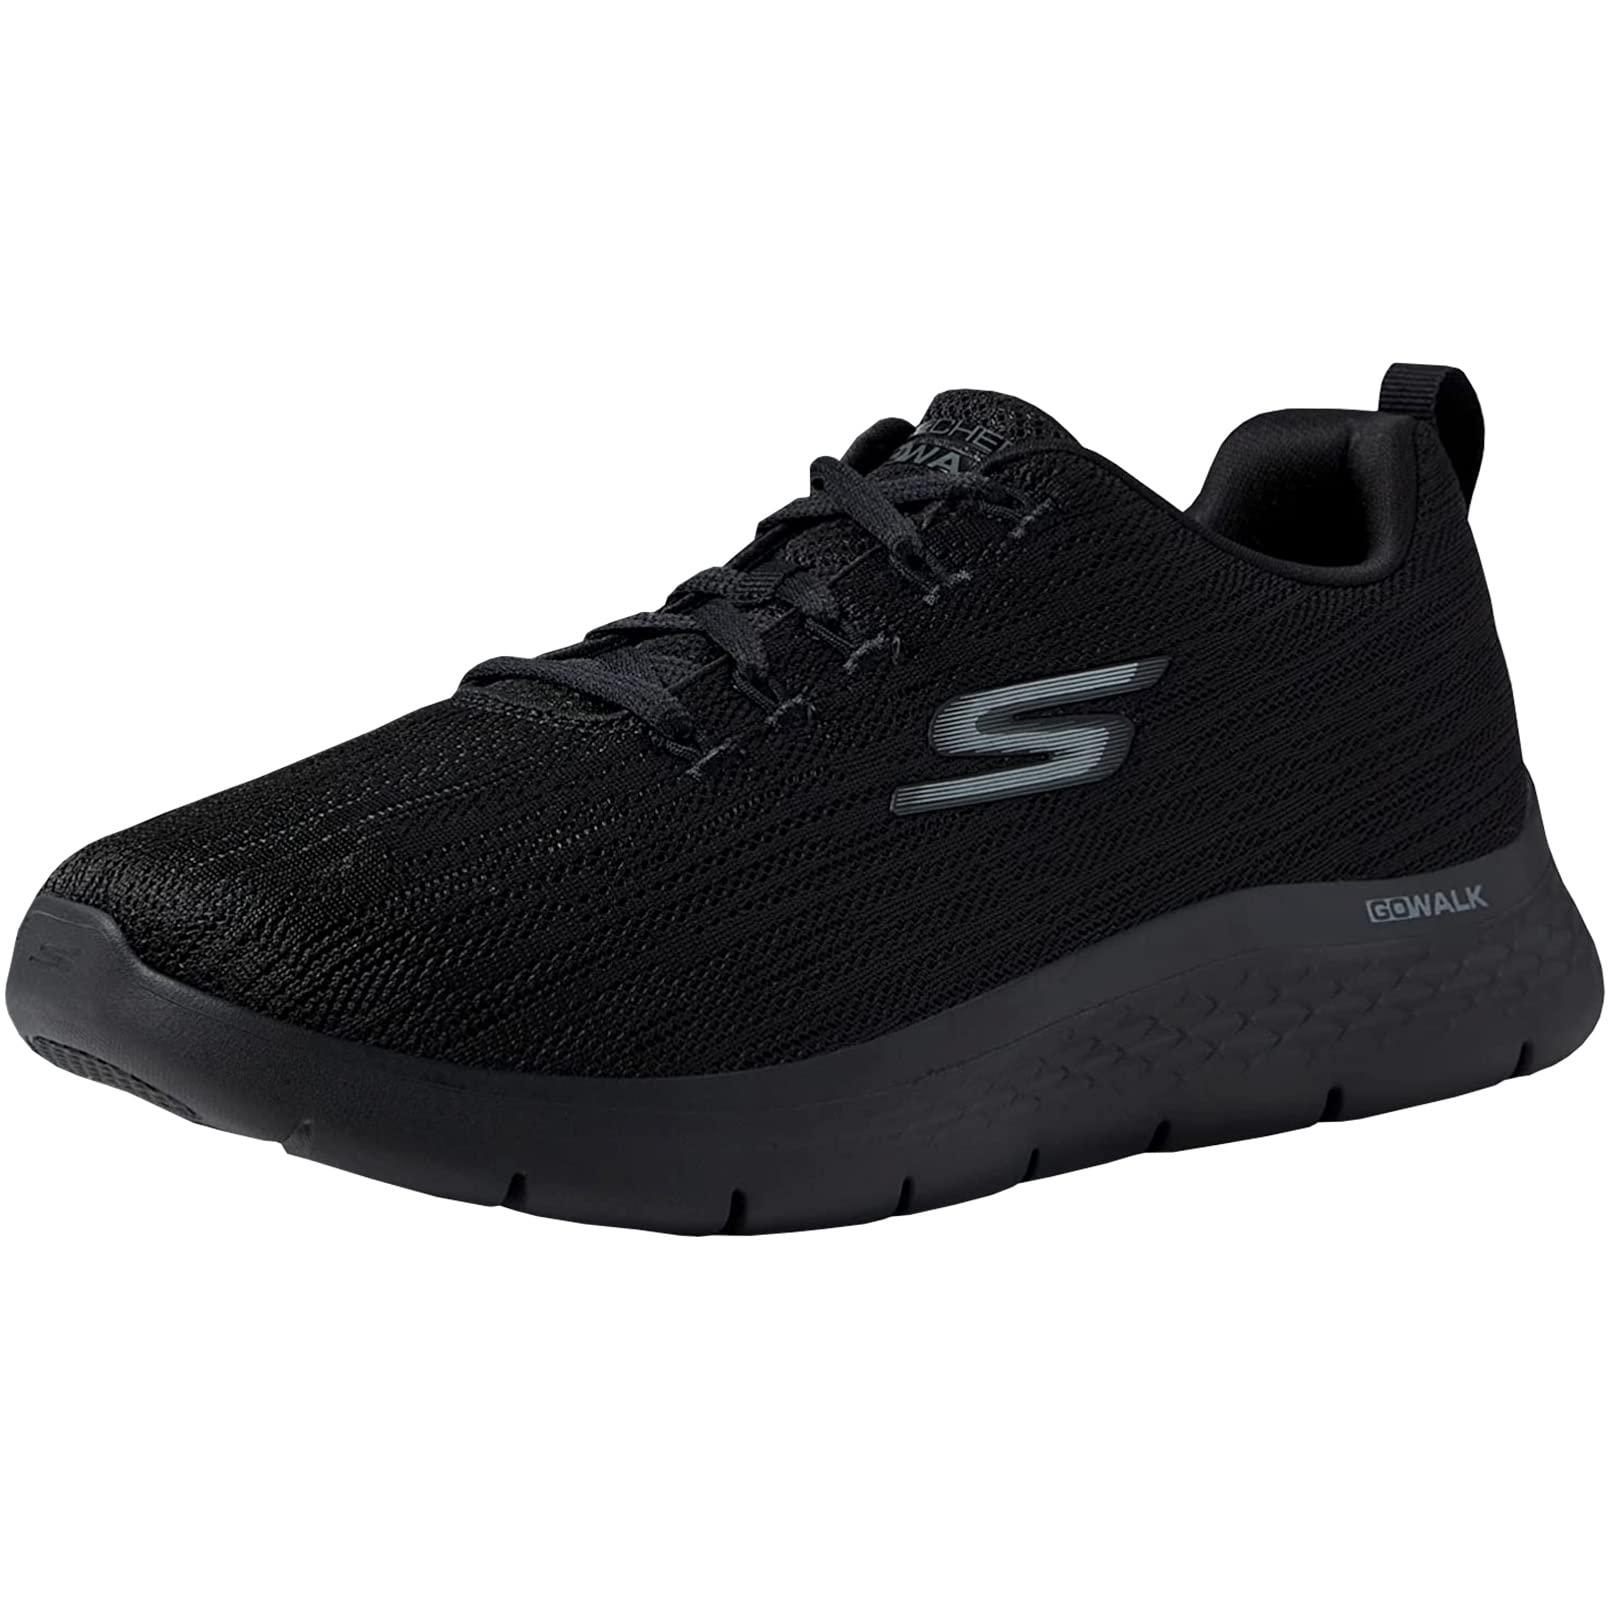 Skechers Gowalk Flex-athletic Workout Walking Shoes With Air Cooled ...